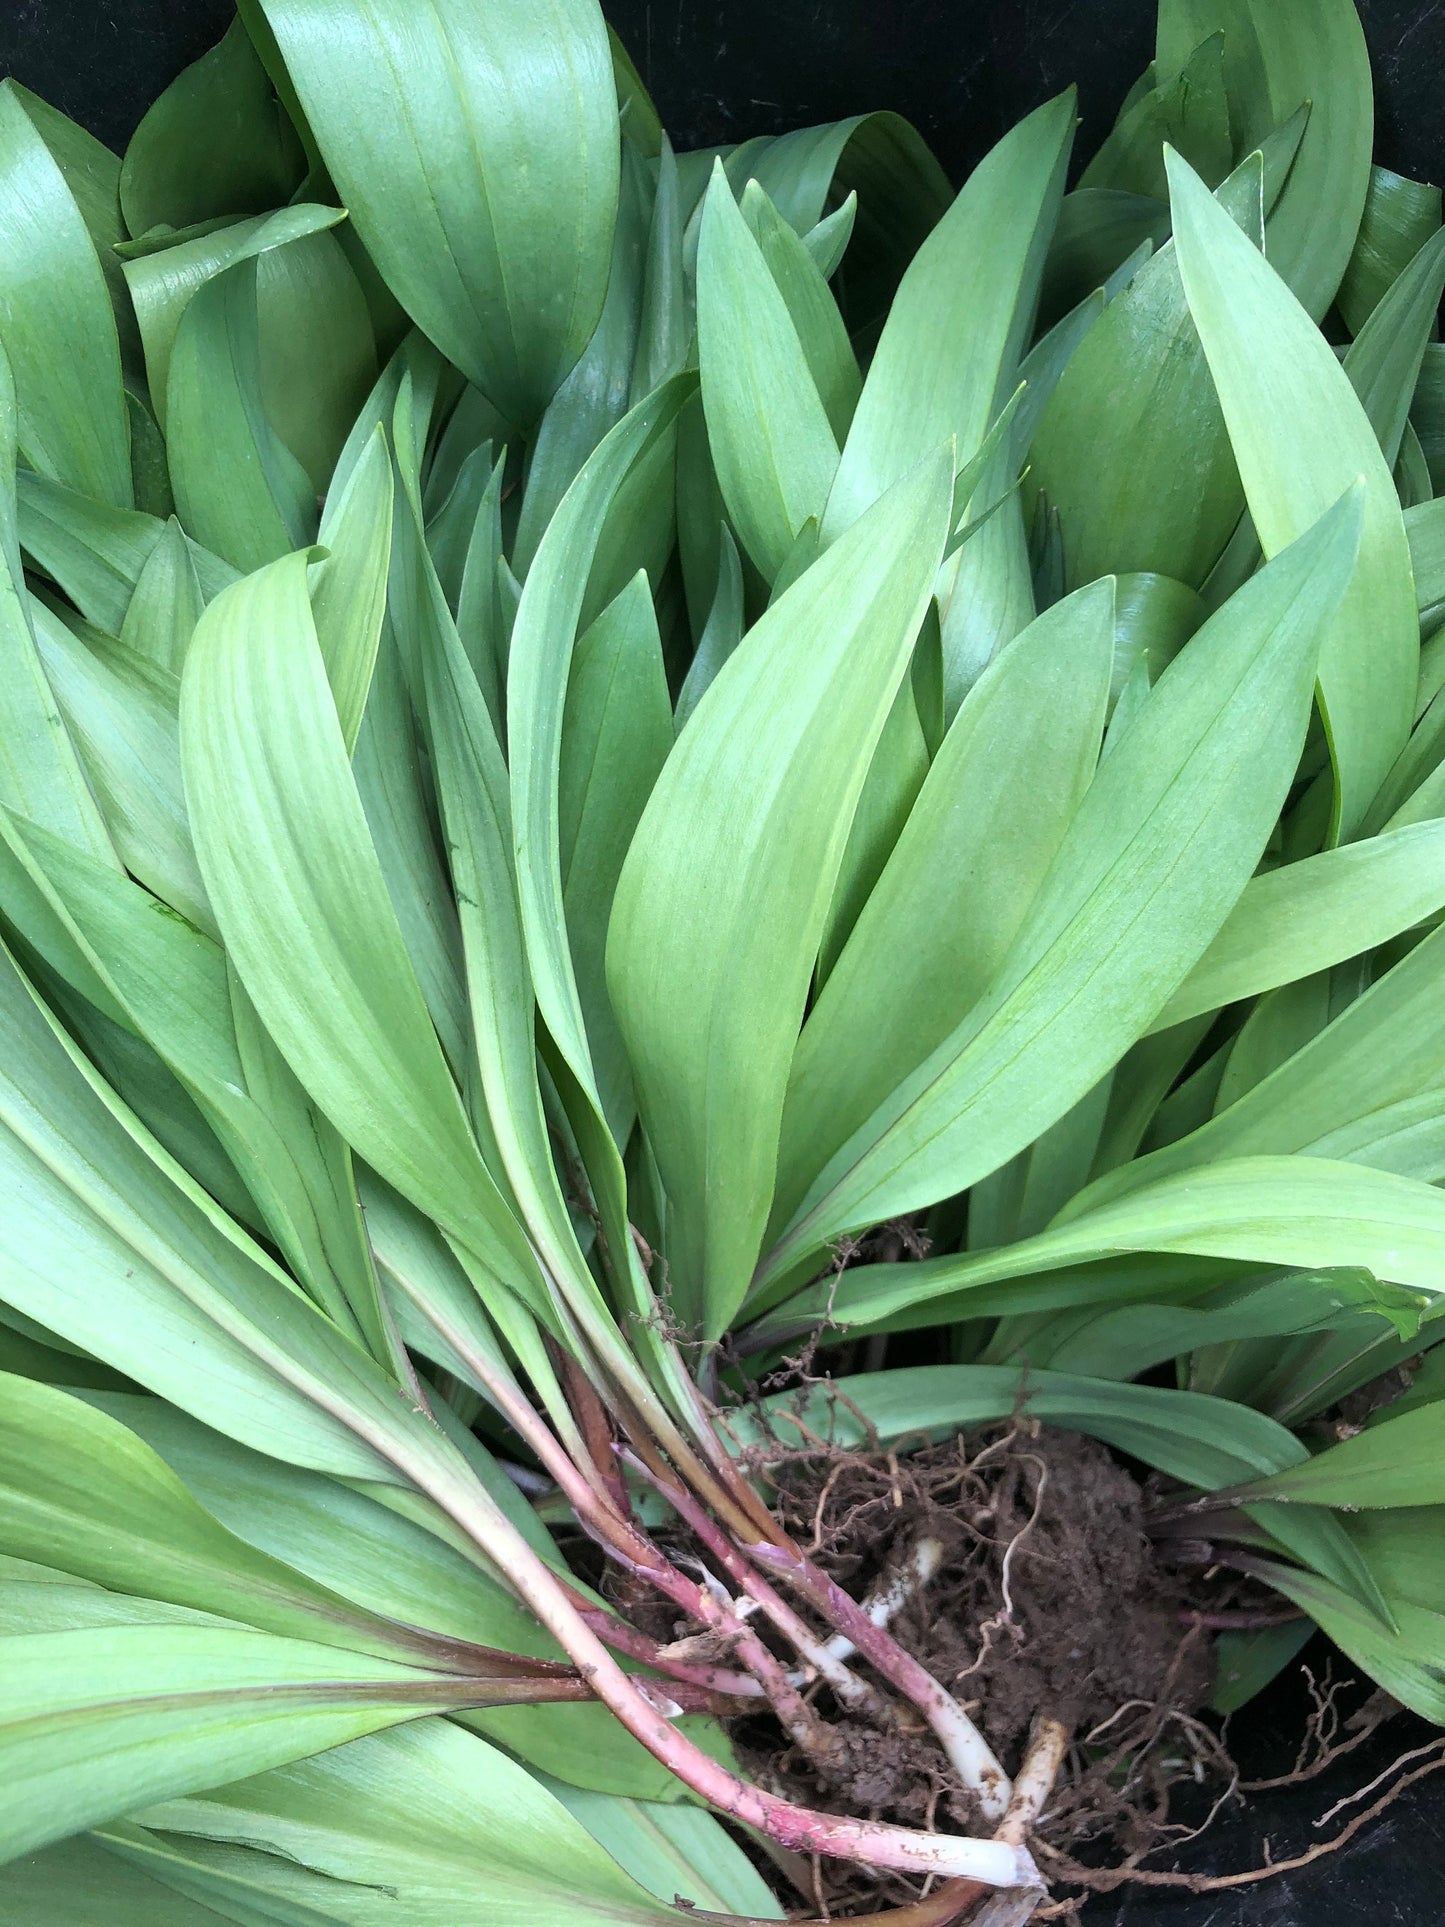 Ramp Bulbs (Allium tricoccum), Ethically and Sustainably Harvested